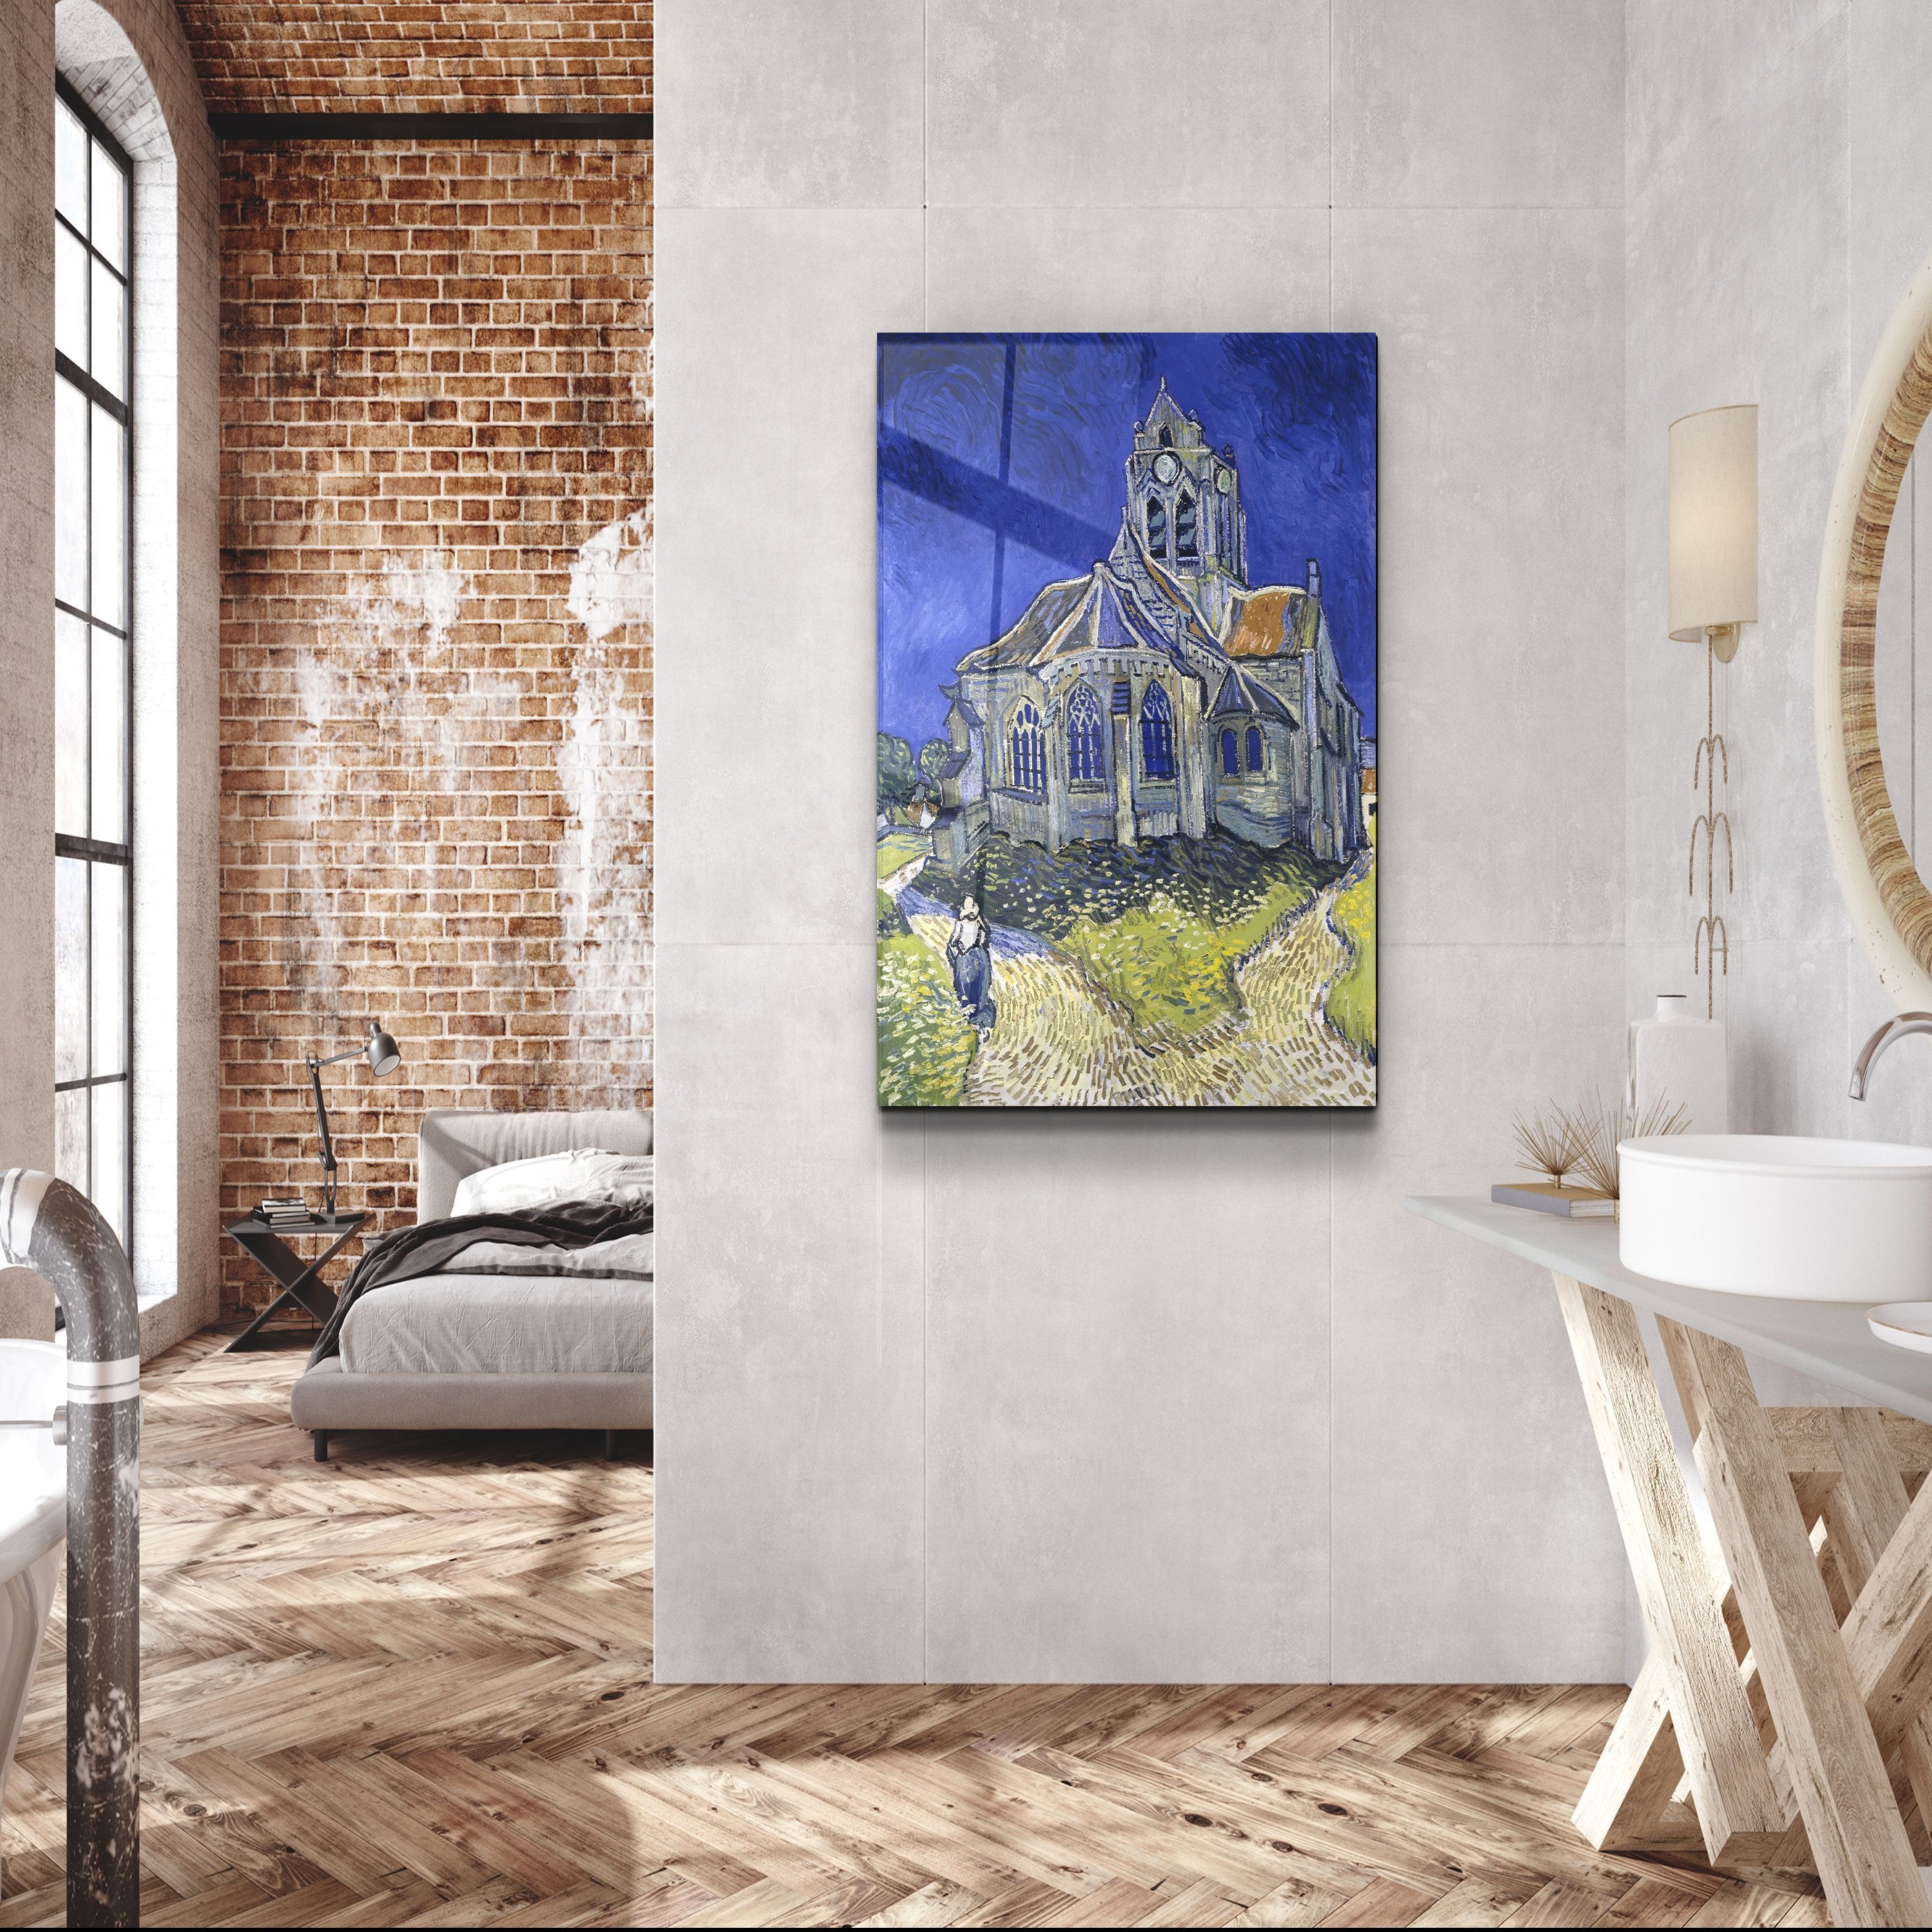 ・"Vincent van Gogh's The Church at Auvers (1890)"・Glass Wall Art